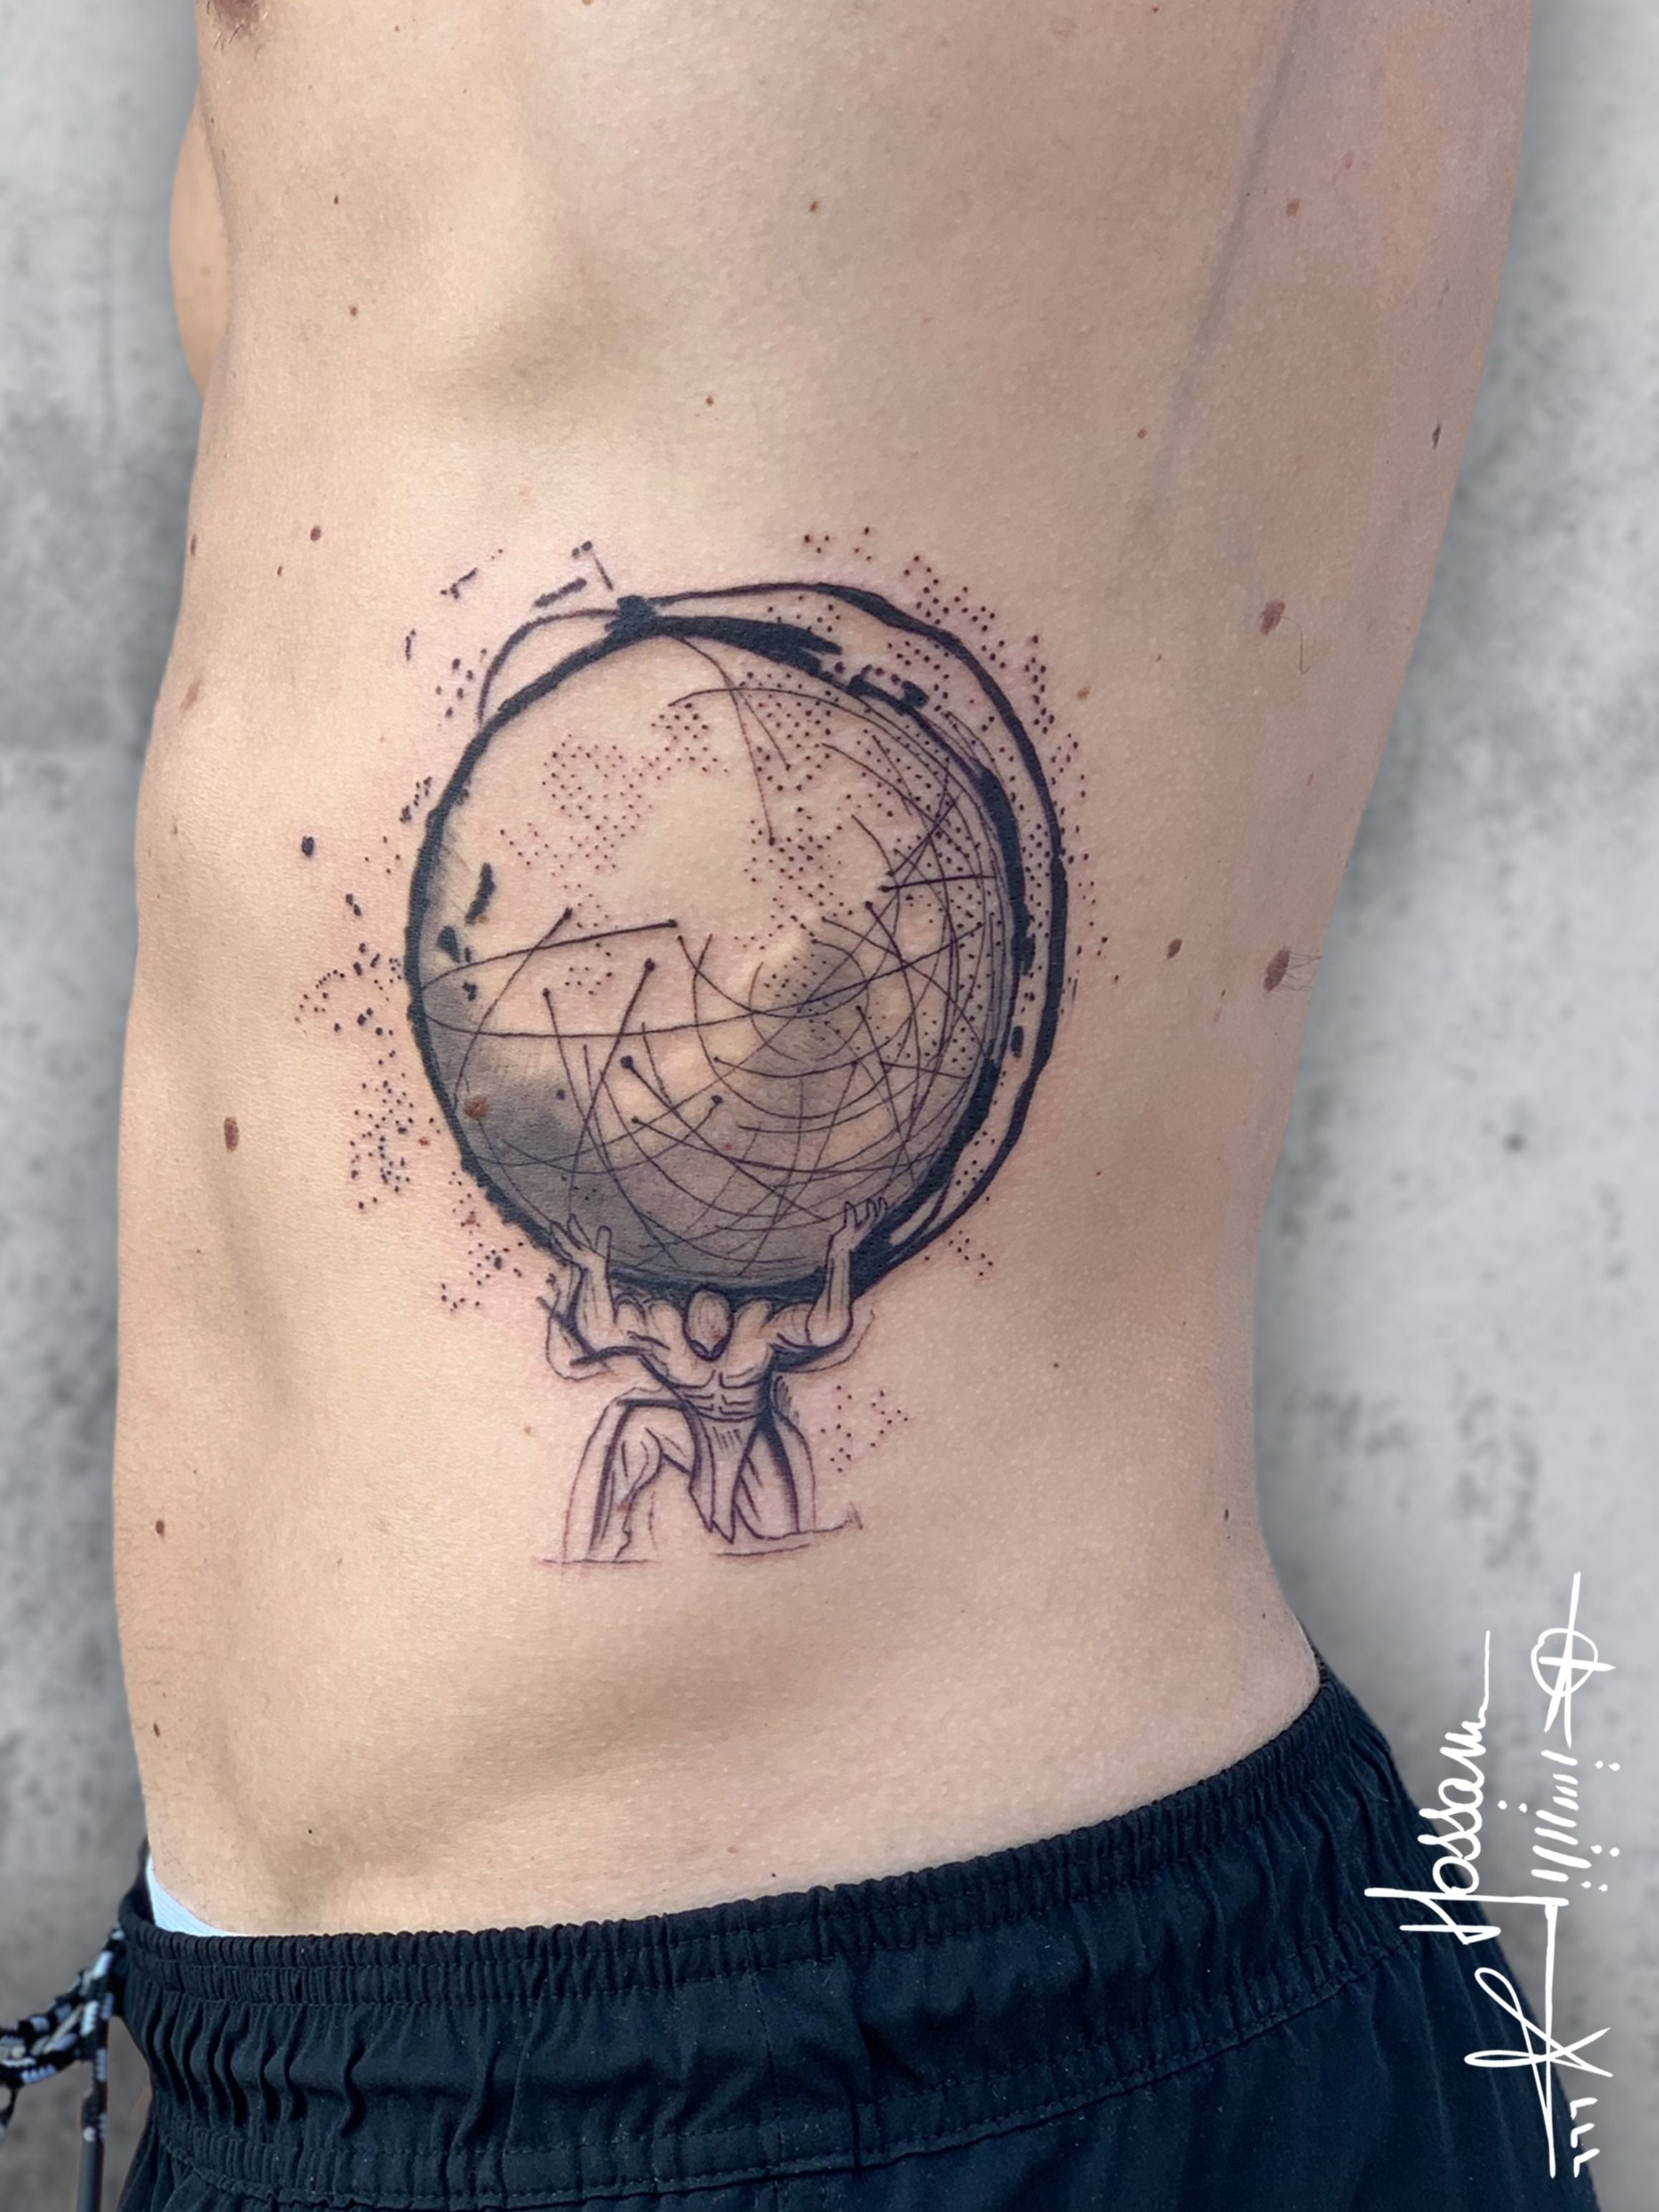 Antoninas Art  Who Put The Weight Of The World On My Shoulders   Booking for Guest Spot in Munich  antoninasartdesigngmailcom  Booking only  via email  Zapisy tylko mailowo warsawink 